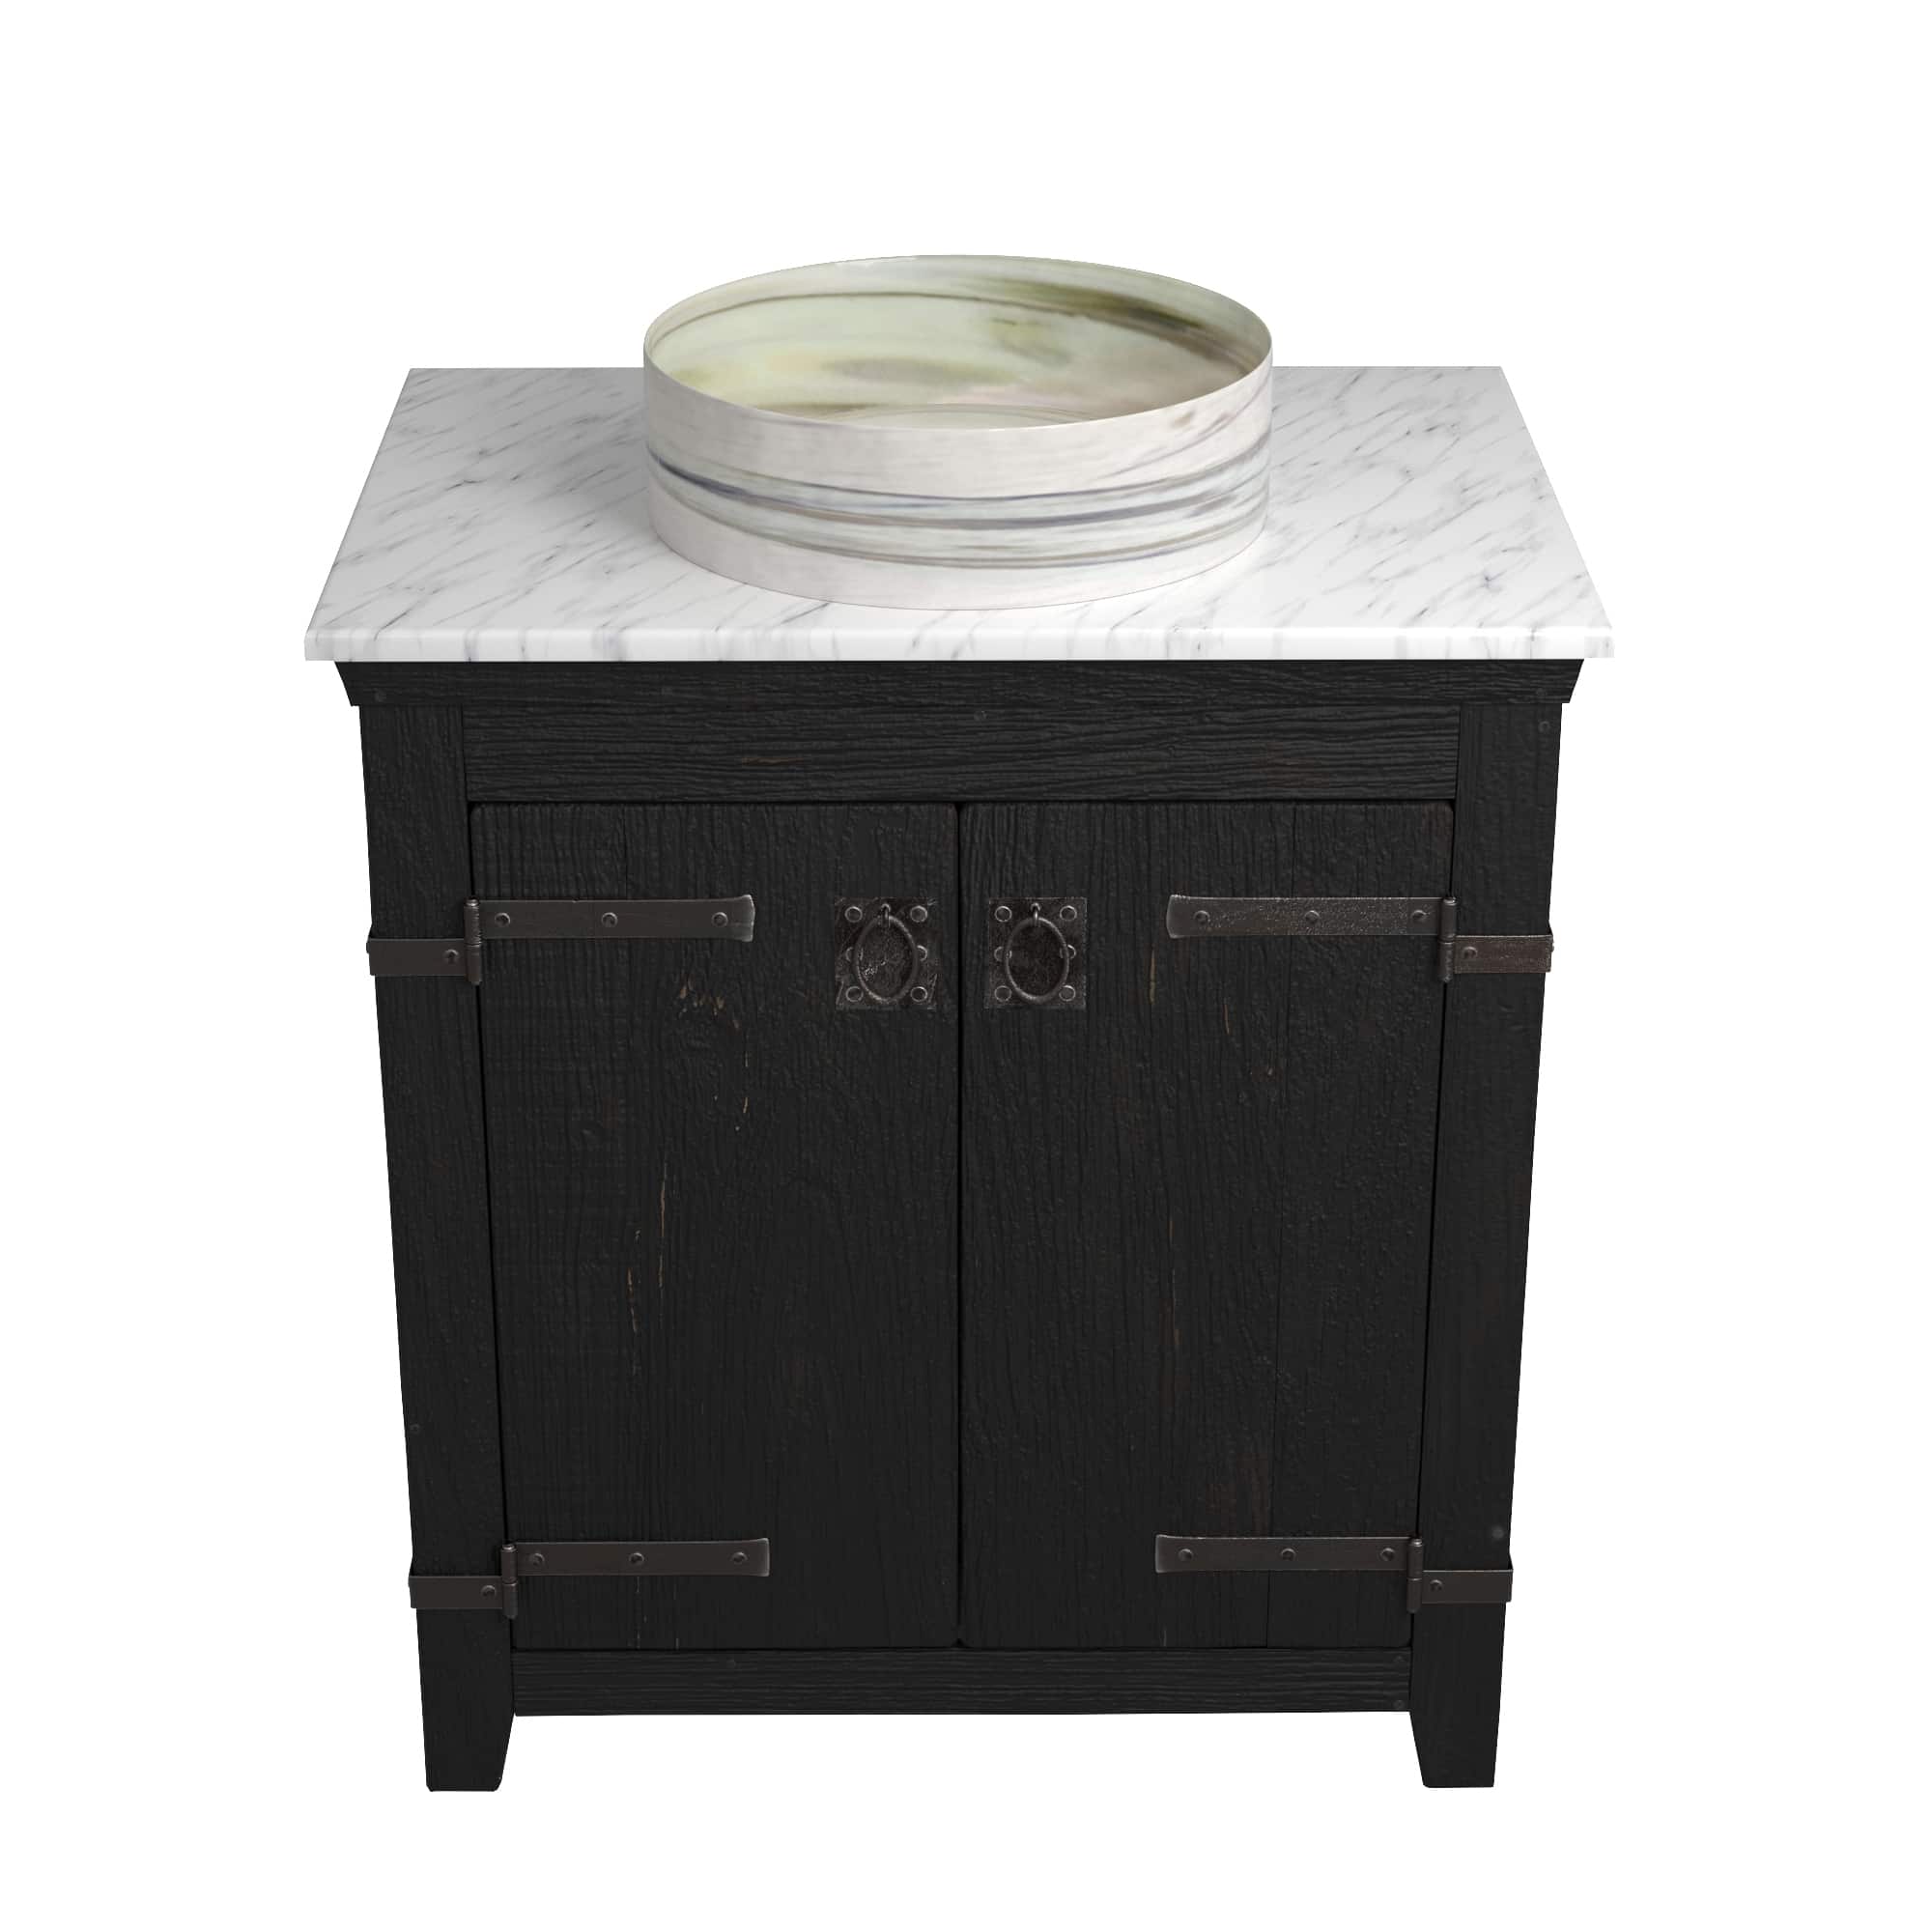 Native Trails 30" Americana Vanity in Anvil with Carrara Marble Top and Positano in Abalone, Single Faucet Hole, BND30-VB-CT-MG-037